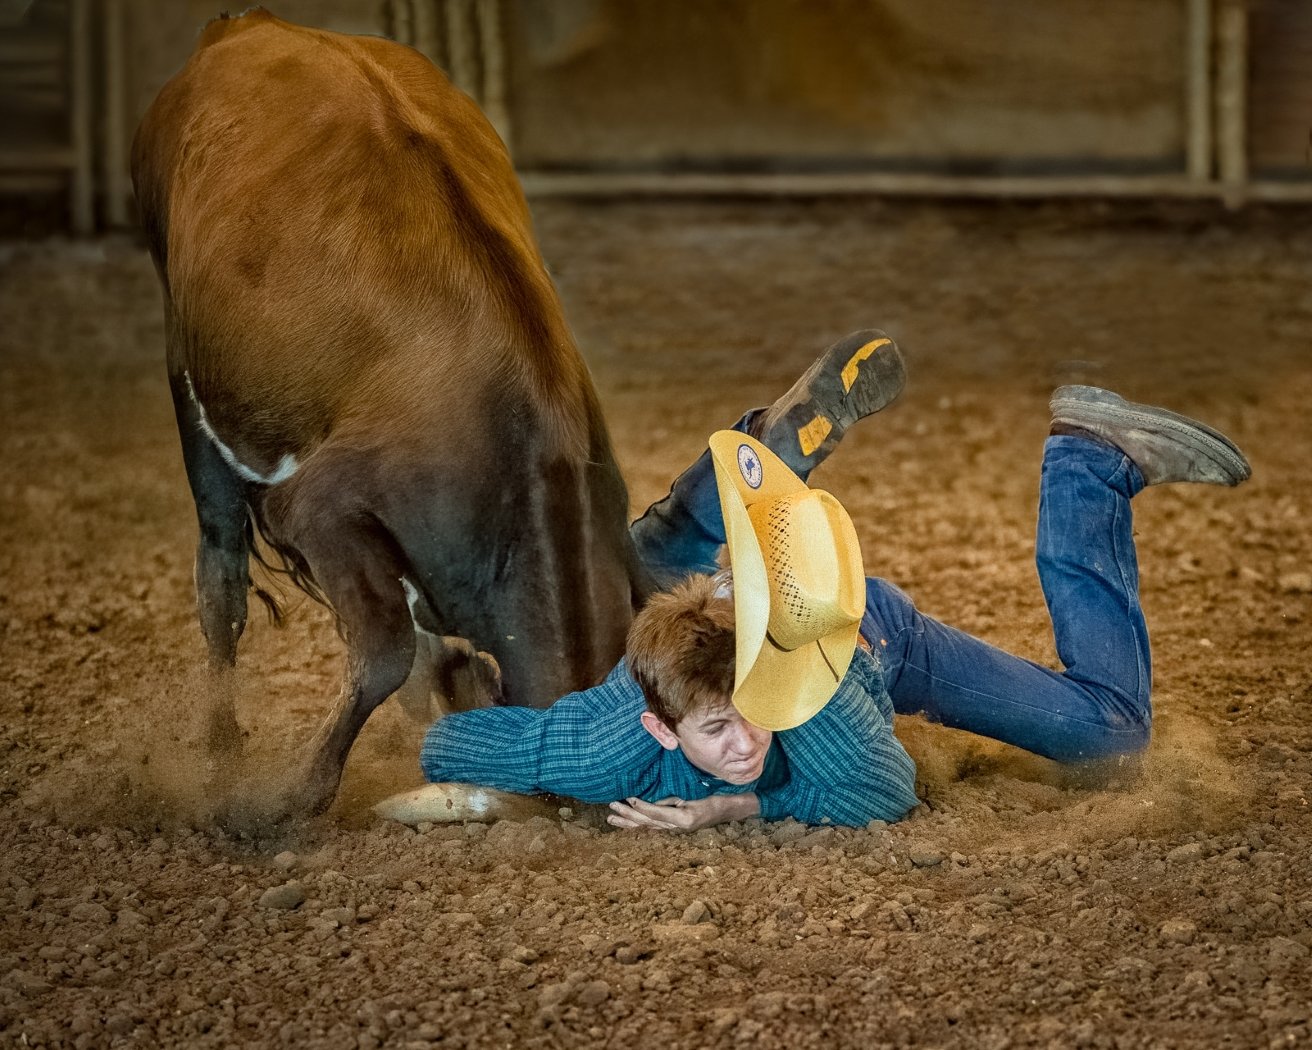 Too Much Steer,	Dennis	Fritsche, Dallas Camera Club, 1st Place